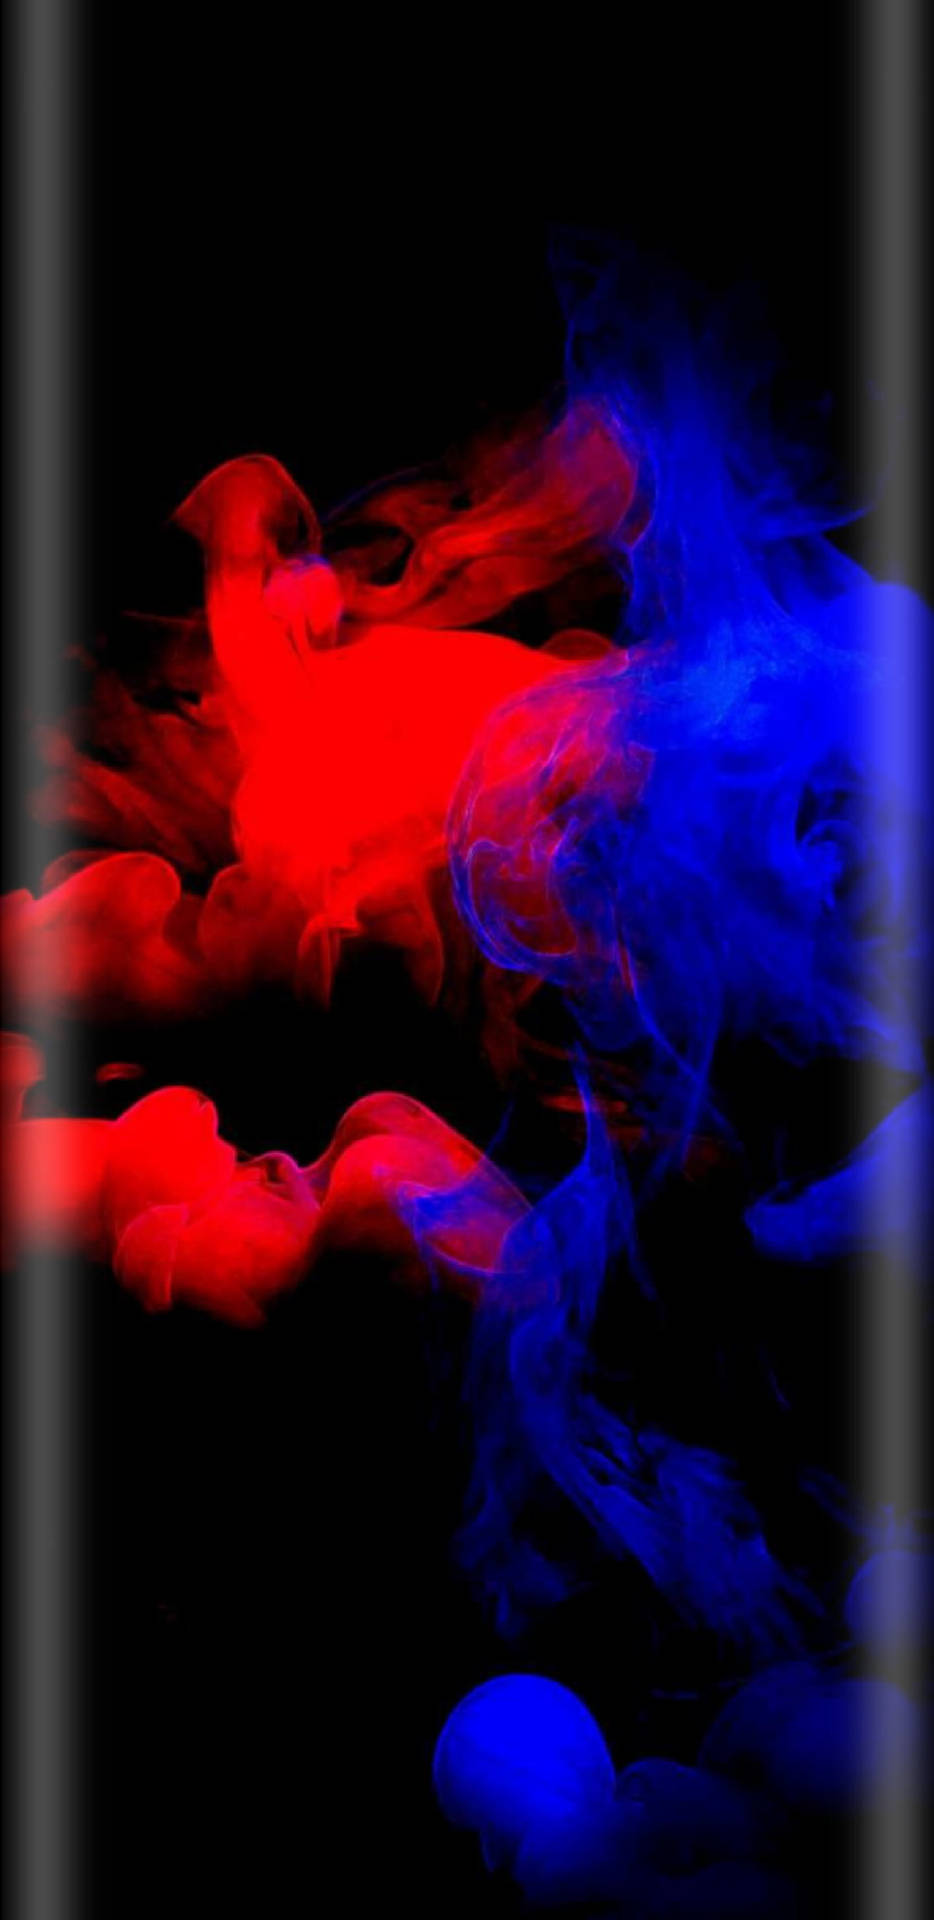 Blue And Red Smoke On Samsung Full Hd